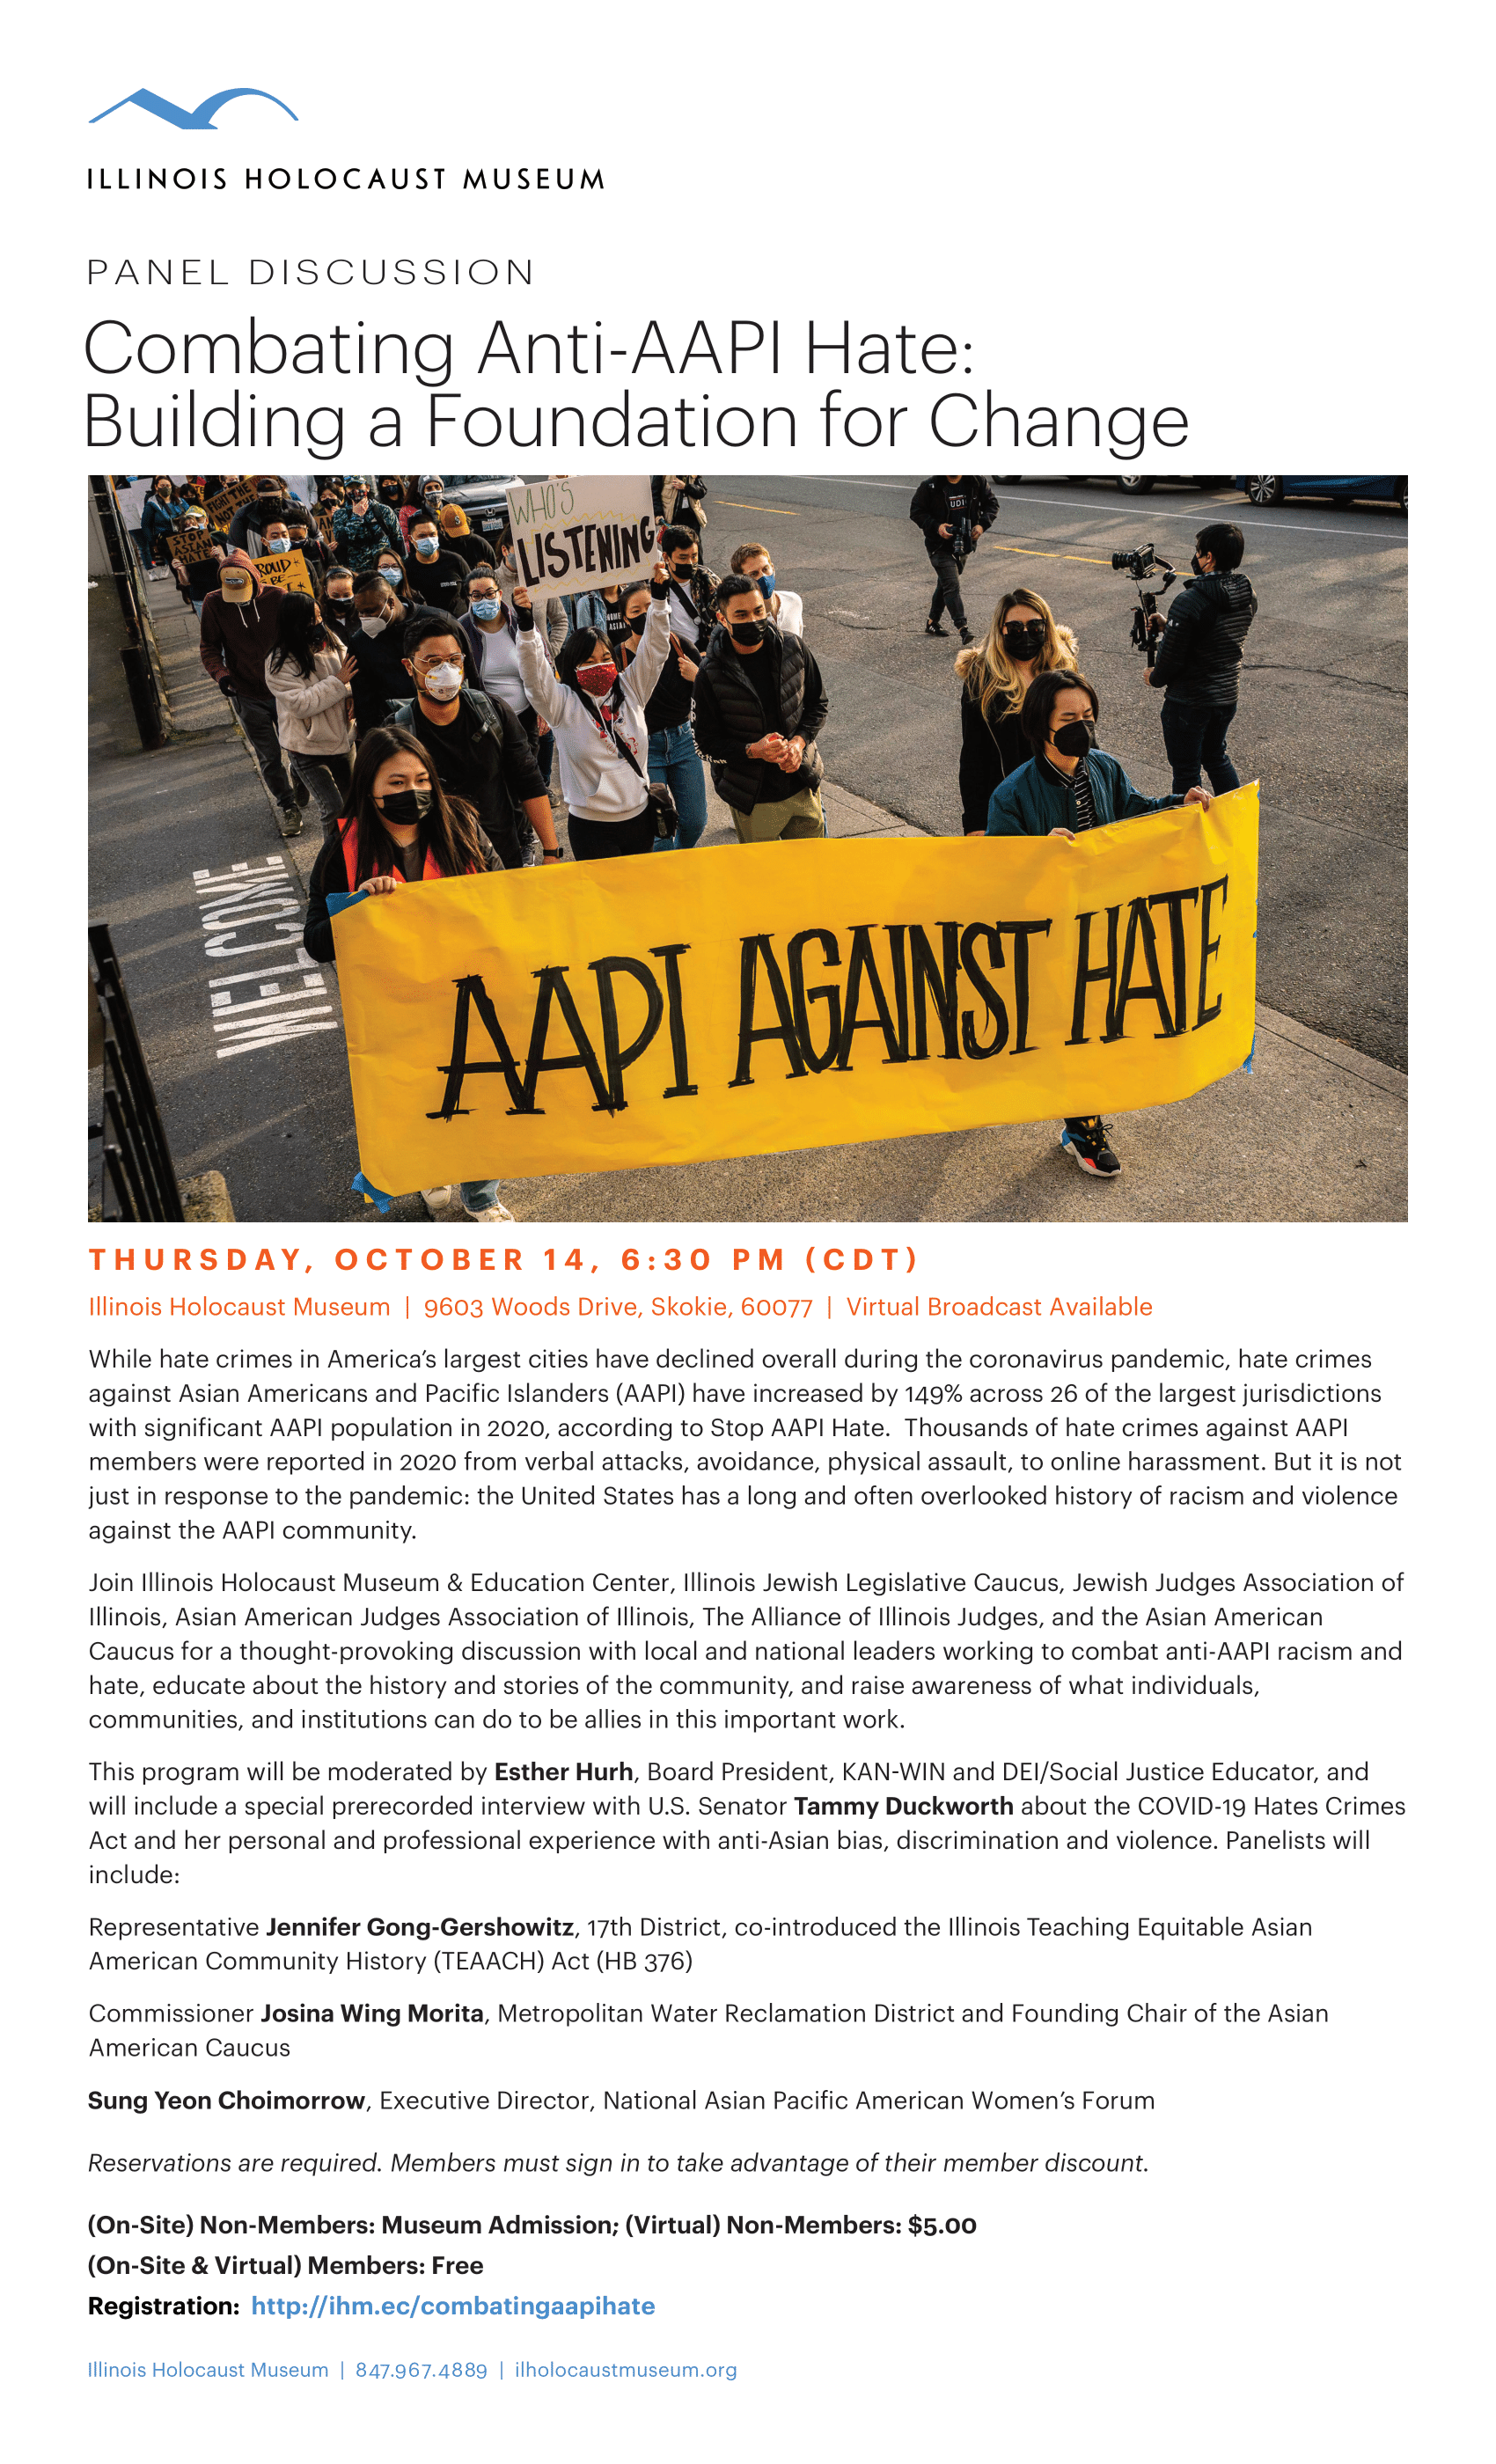 Combating Anti-AAPI Hate – October 14th